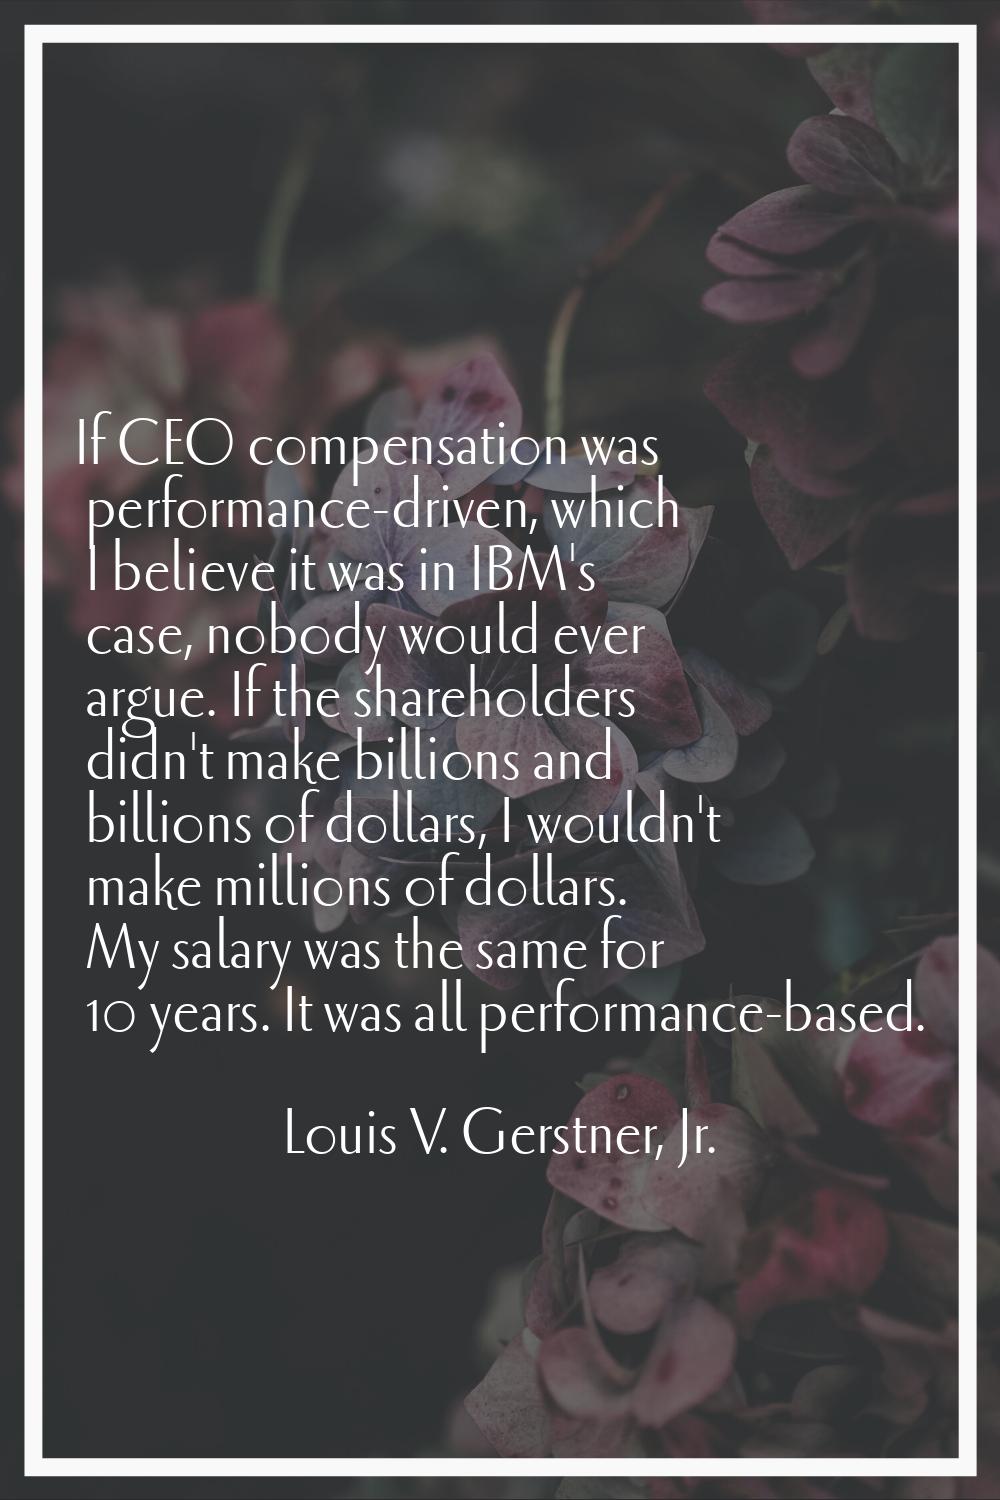 If CEO compensation was performance-driven, which I believe it was in IBM's case, nobody would ever